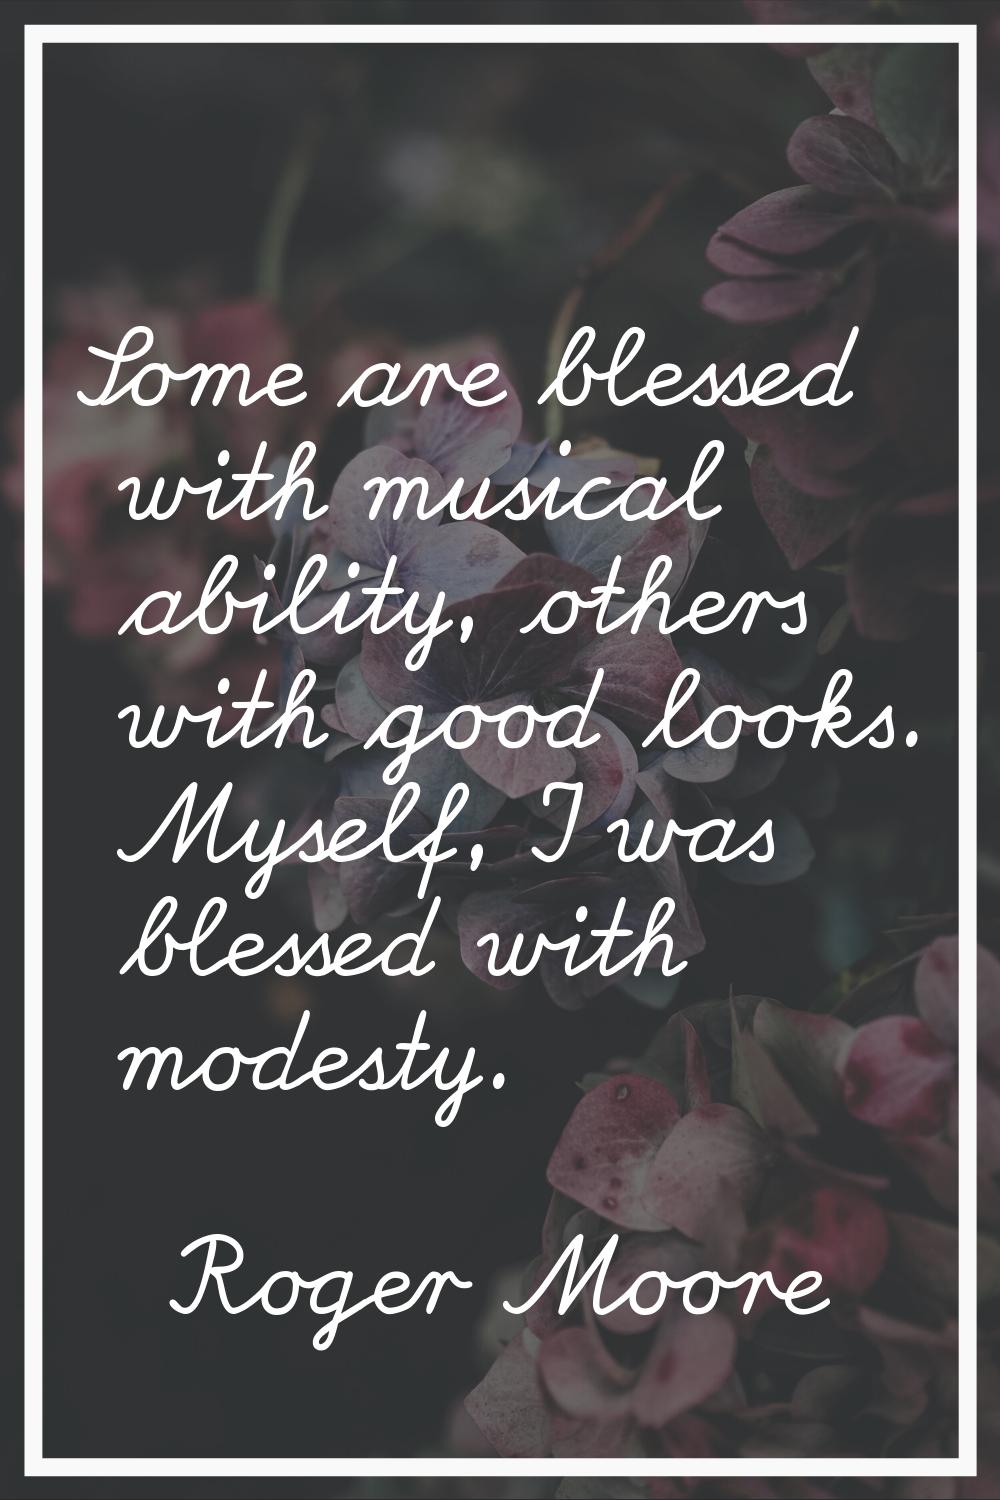 Some are blessed with musical ability, others with good looks. Myself, I was blessed with modesty.